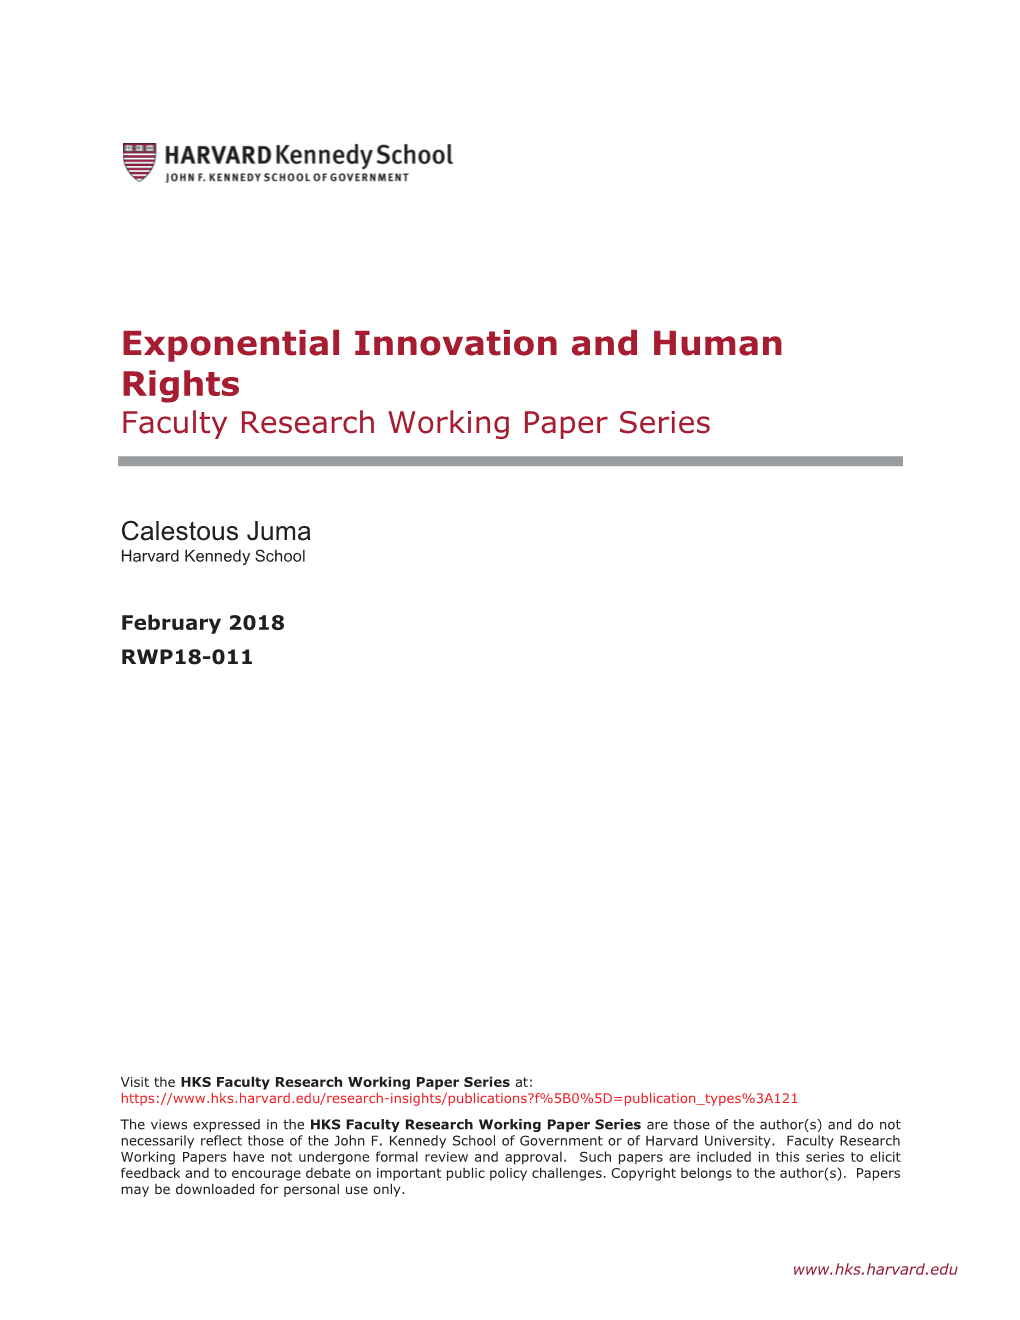 Exponential Innovation and Human Rights Faculty Research Working Paper Series